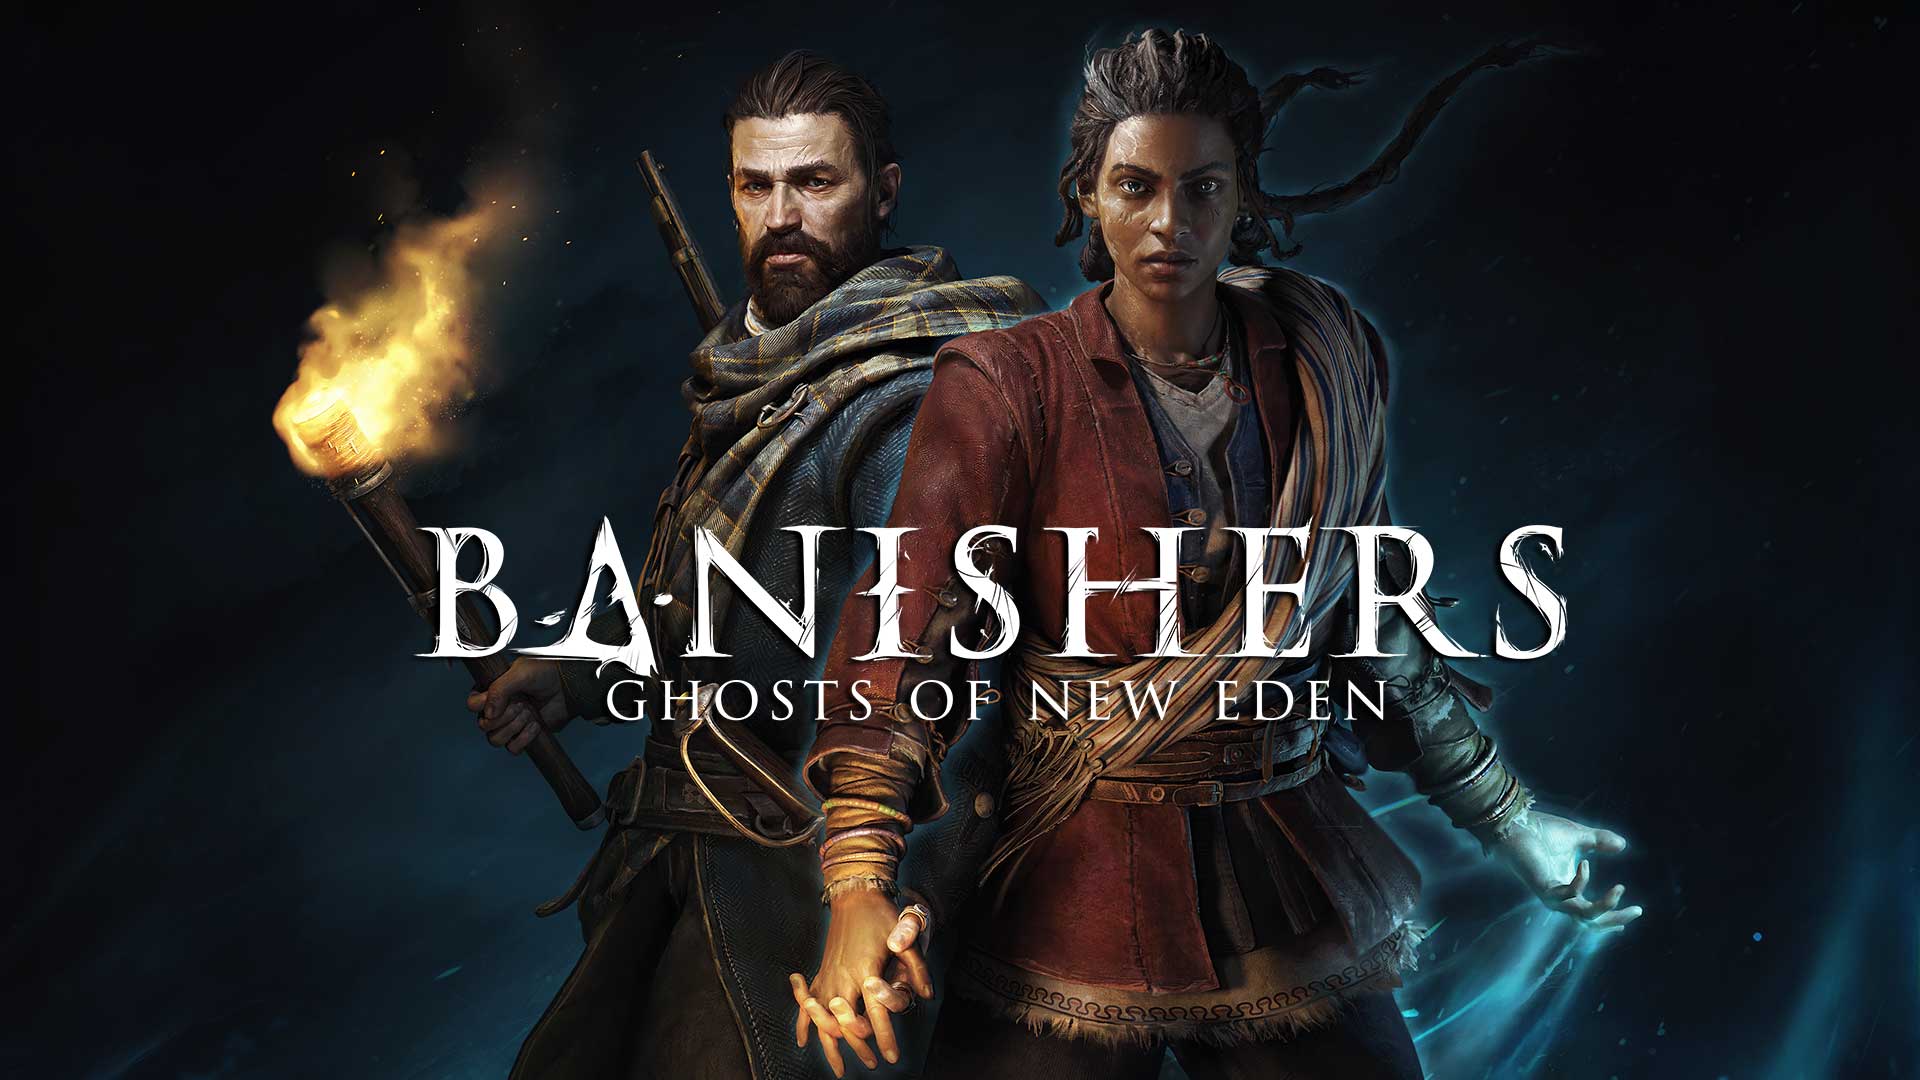 Watch the New Banishers: Ghosts of New Eden Trailer